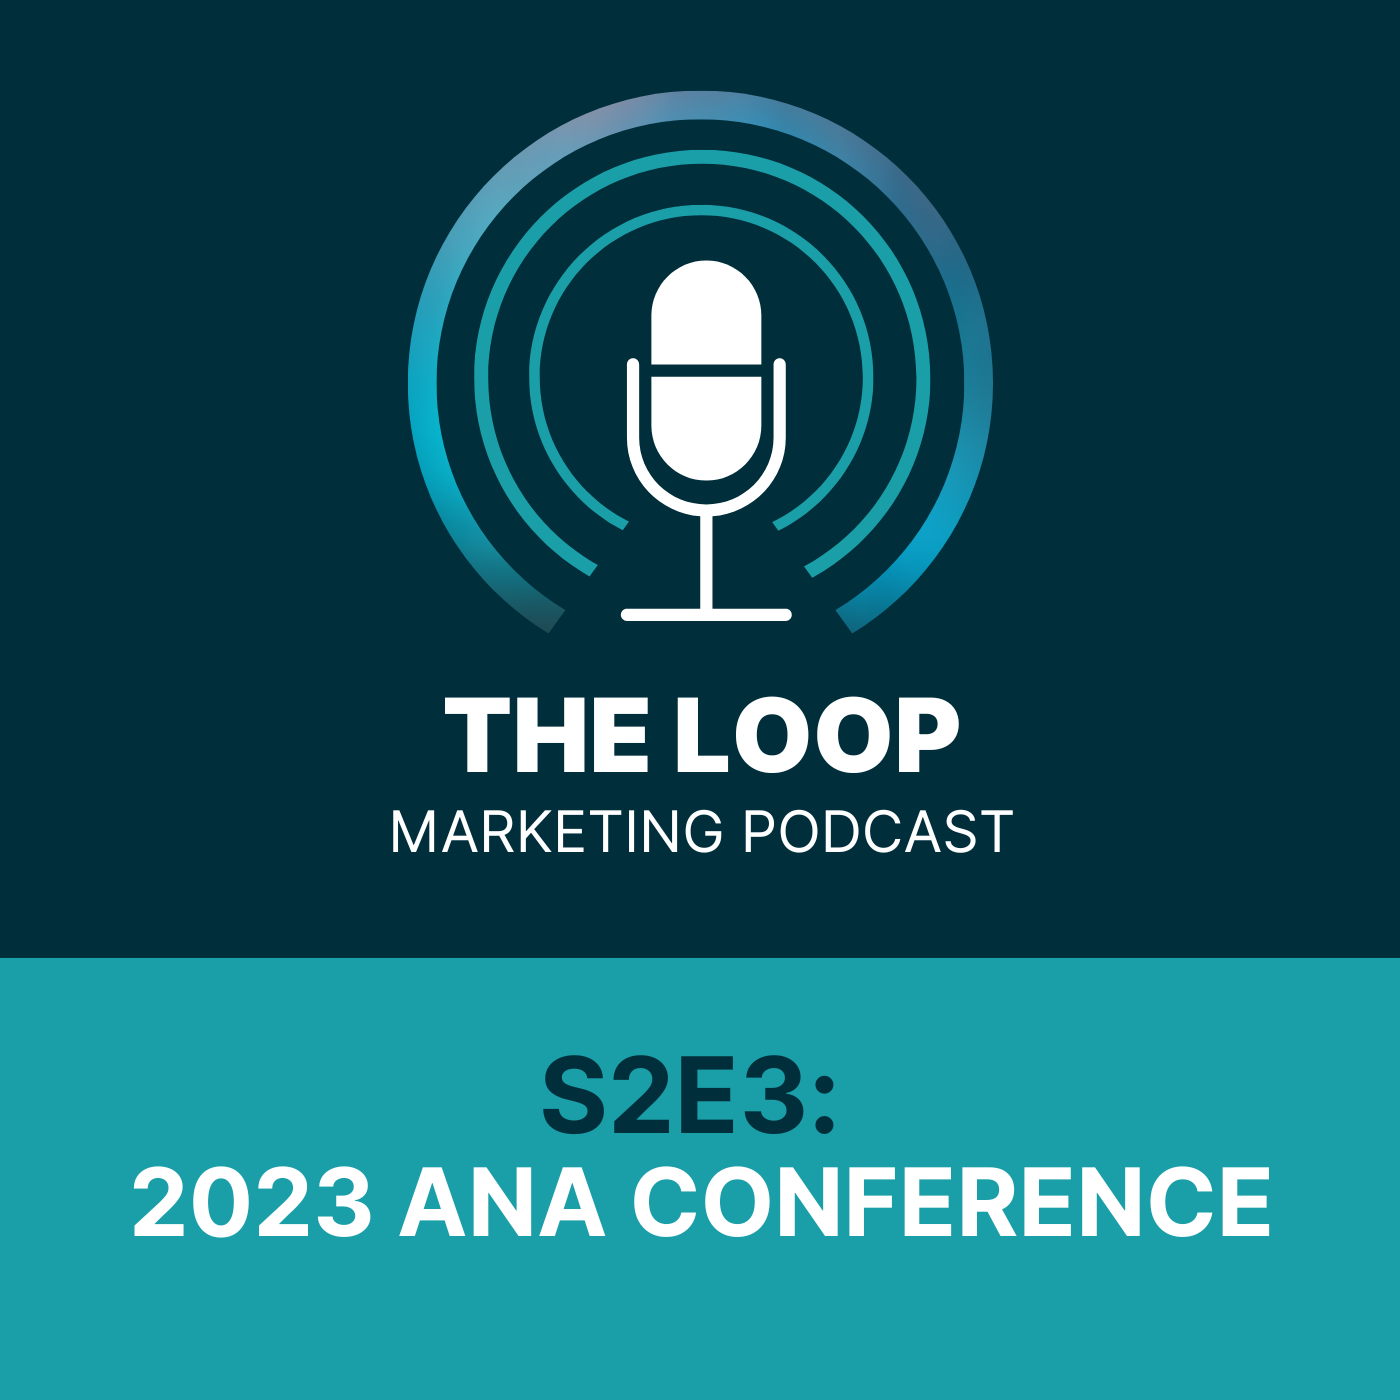 Bonus Episode: The 2023 ANA Conference in Orlando with Ryan Green